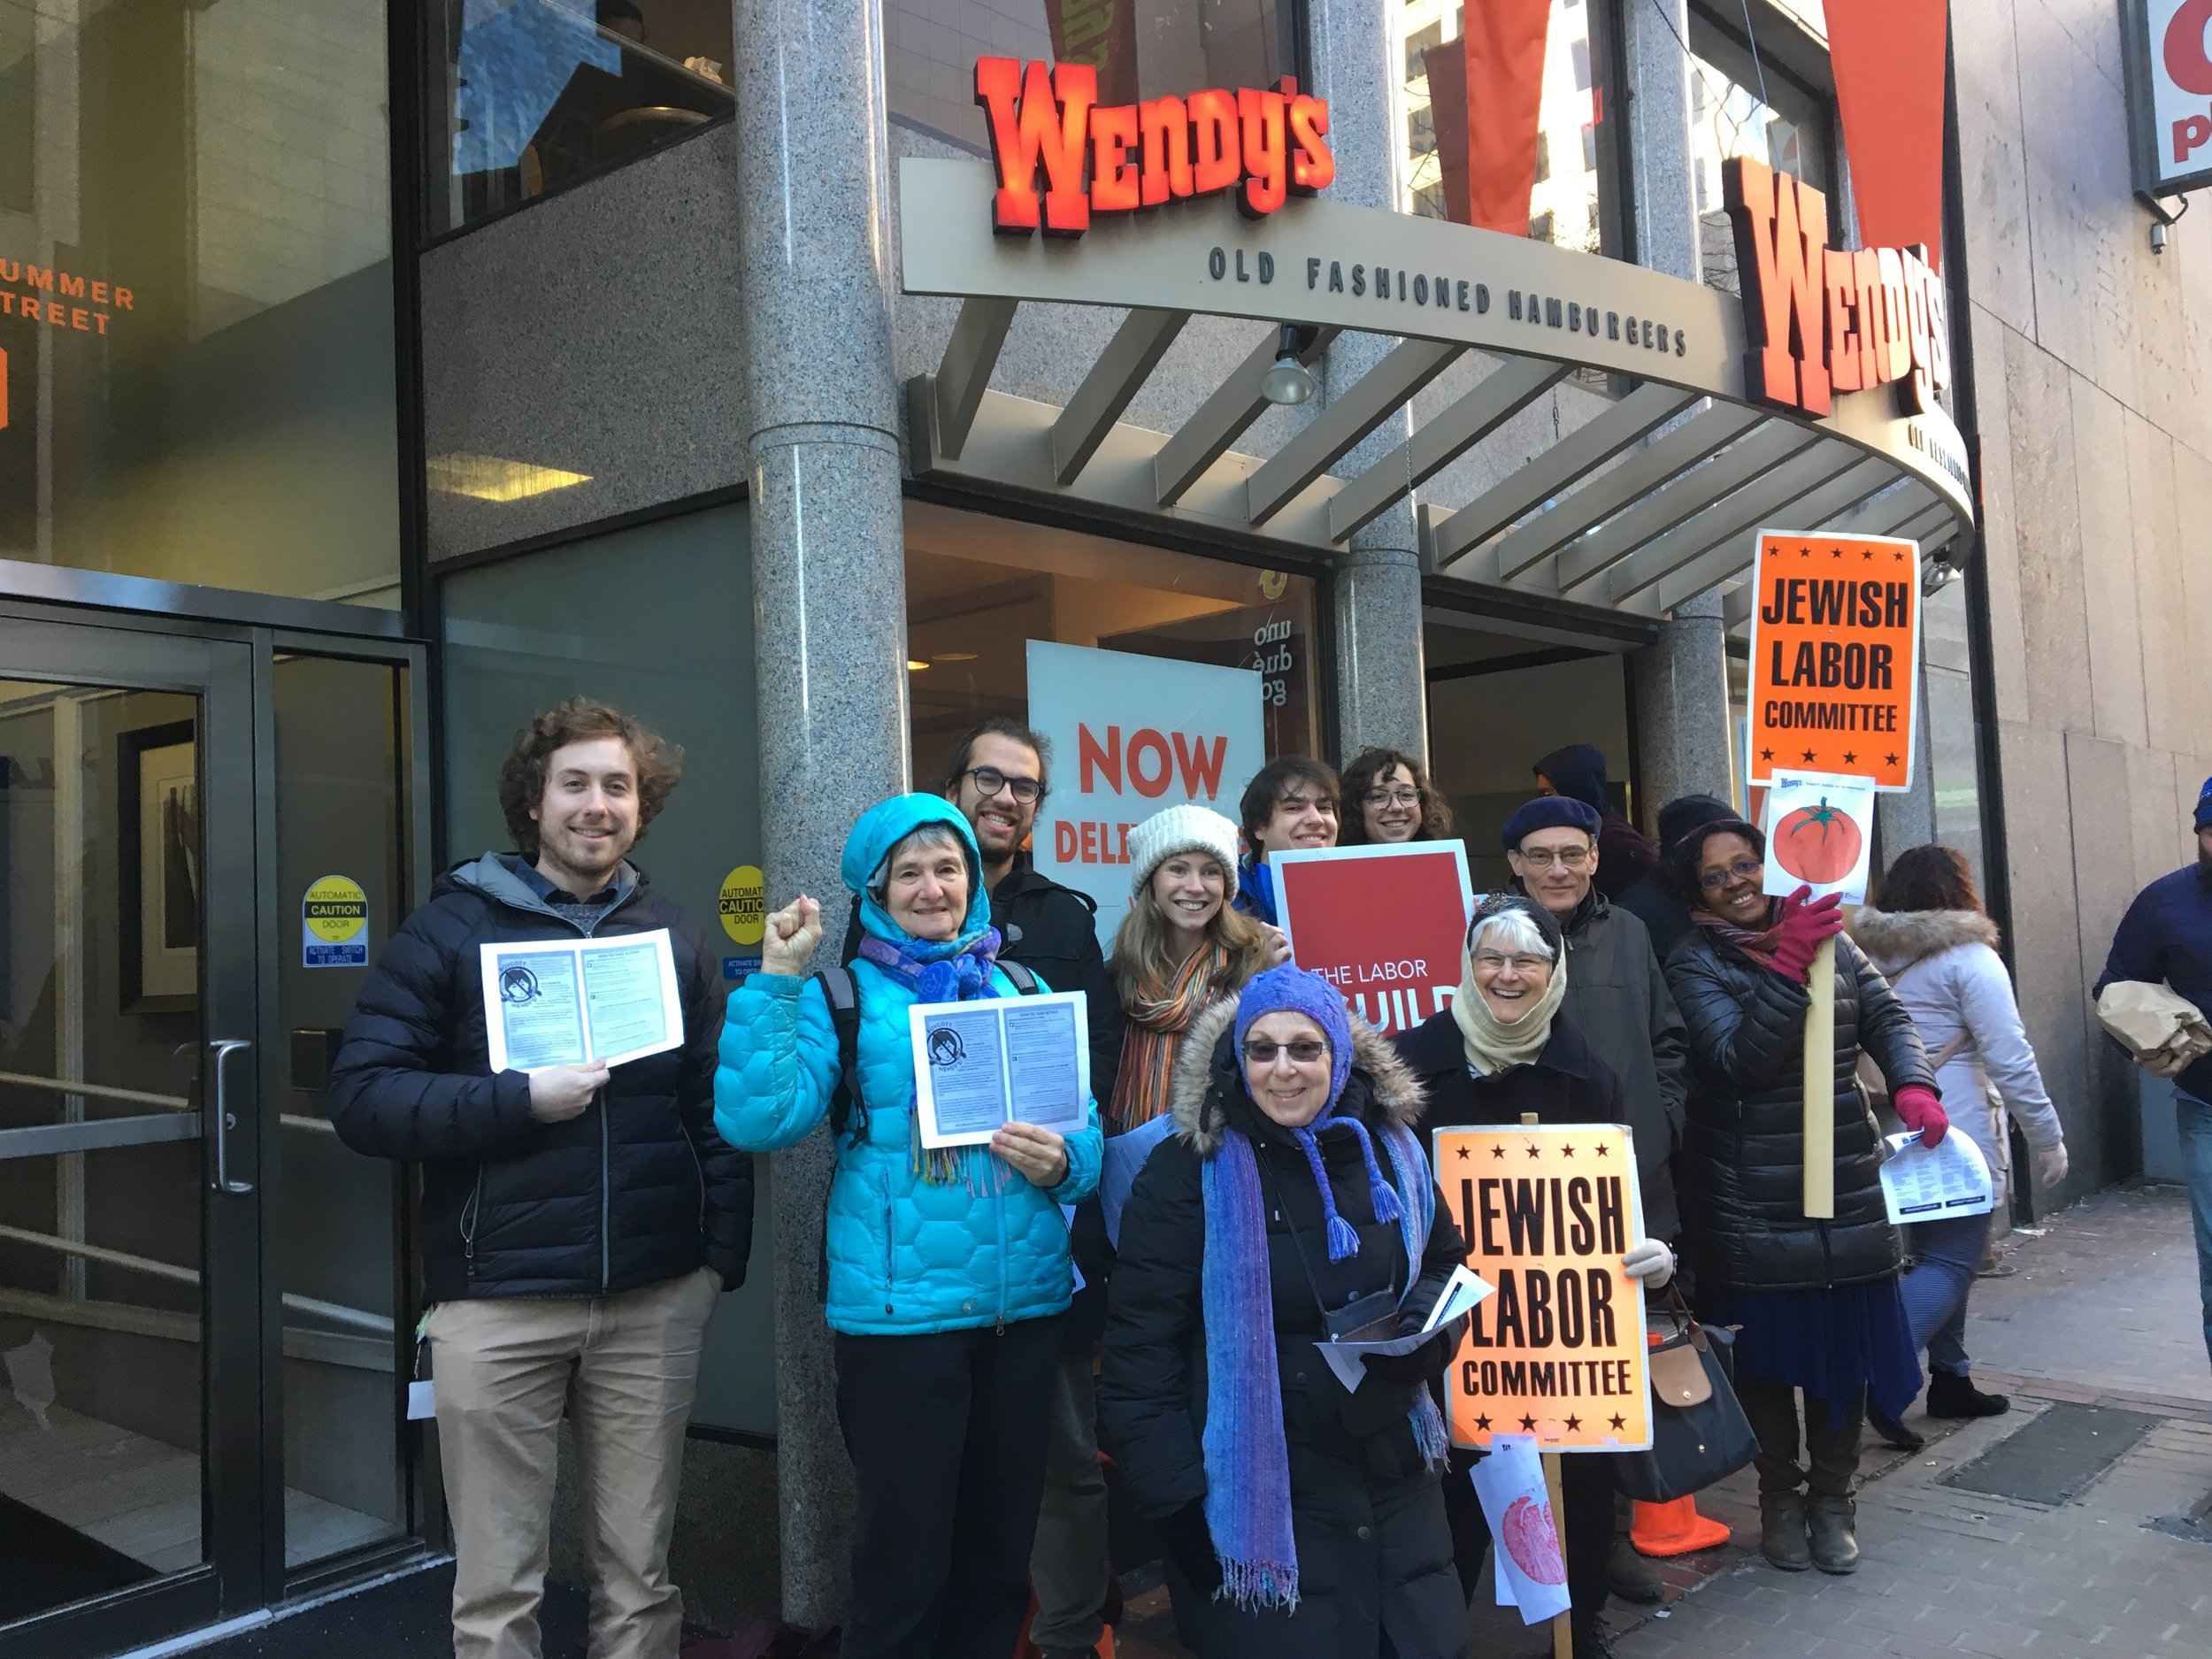 Wendy's protest 1-18-18 group photo.JPG